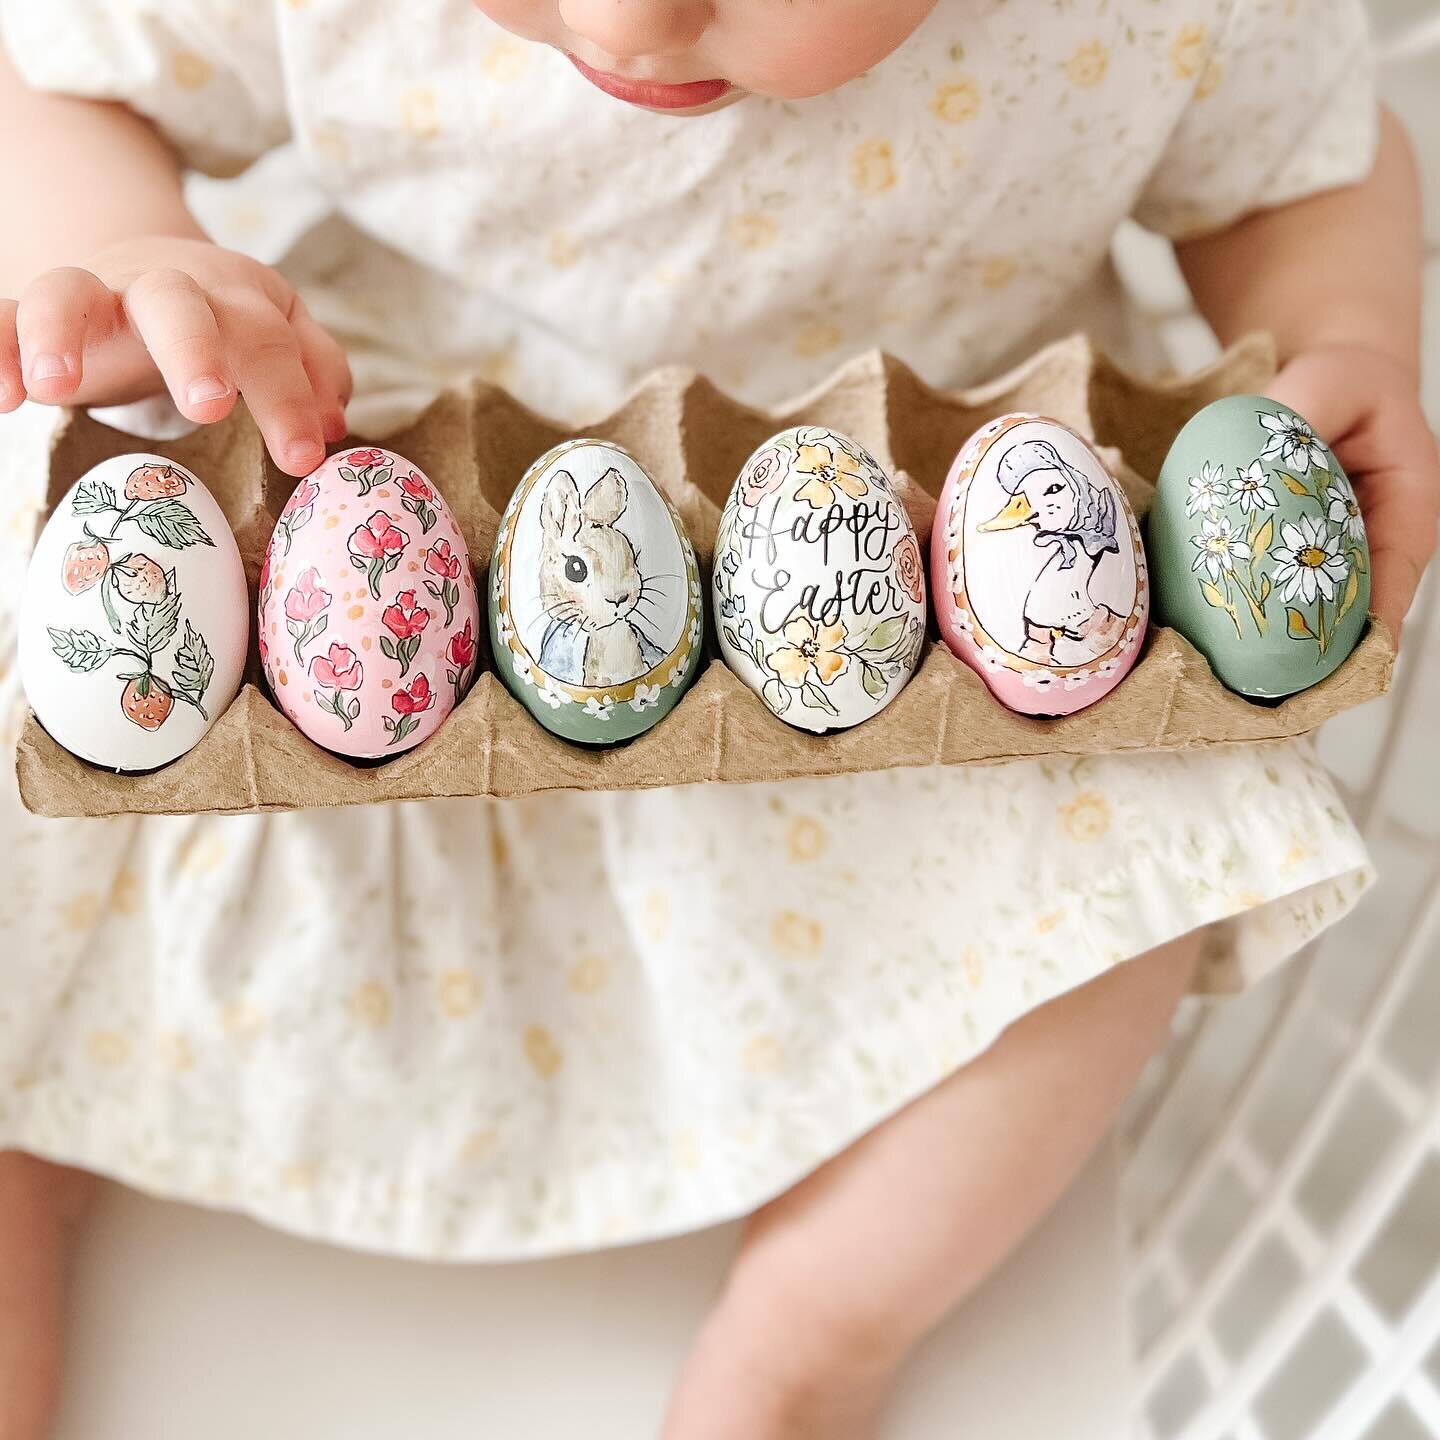 Spring and florals and hand-painted Easter eggs to brighten your day. &ldquo;WOW Mommy!&rdquo; is forever the best compliment from my two year old 🥰💛 (Ps. still on baby watch over here and will likely welcome our next little one right on Easter wee